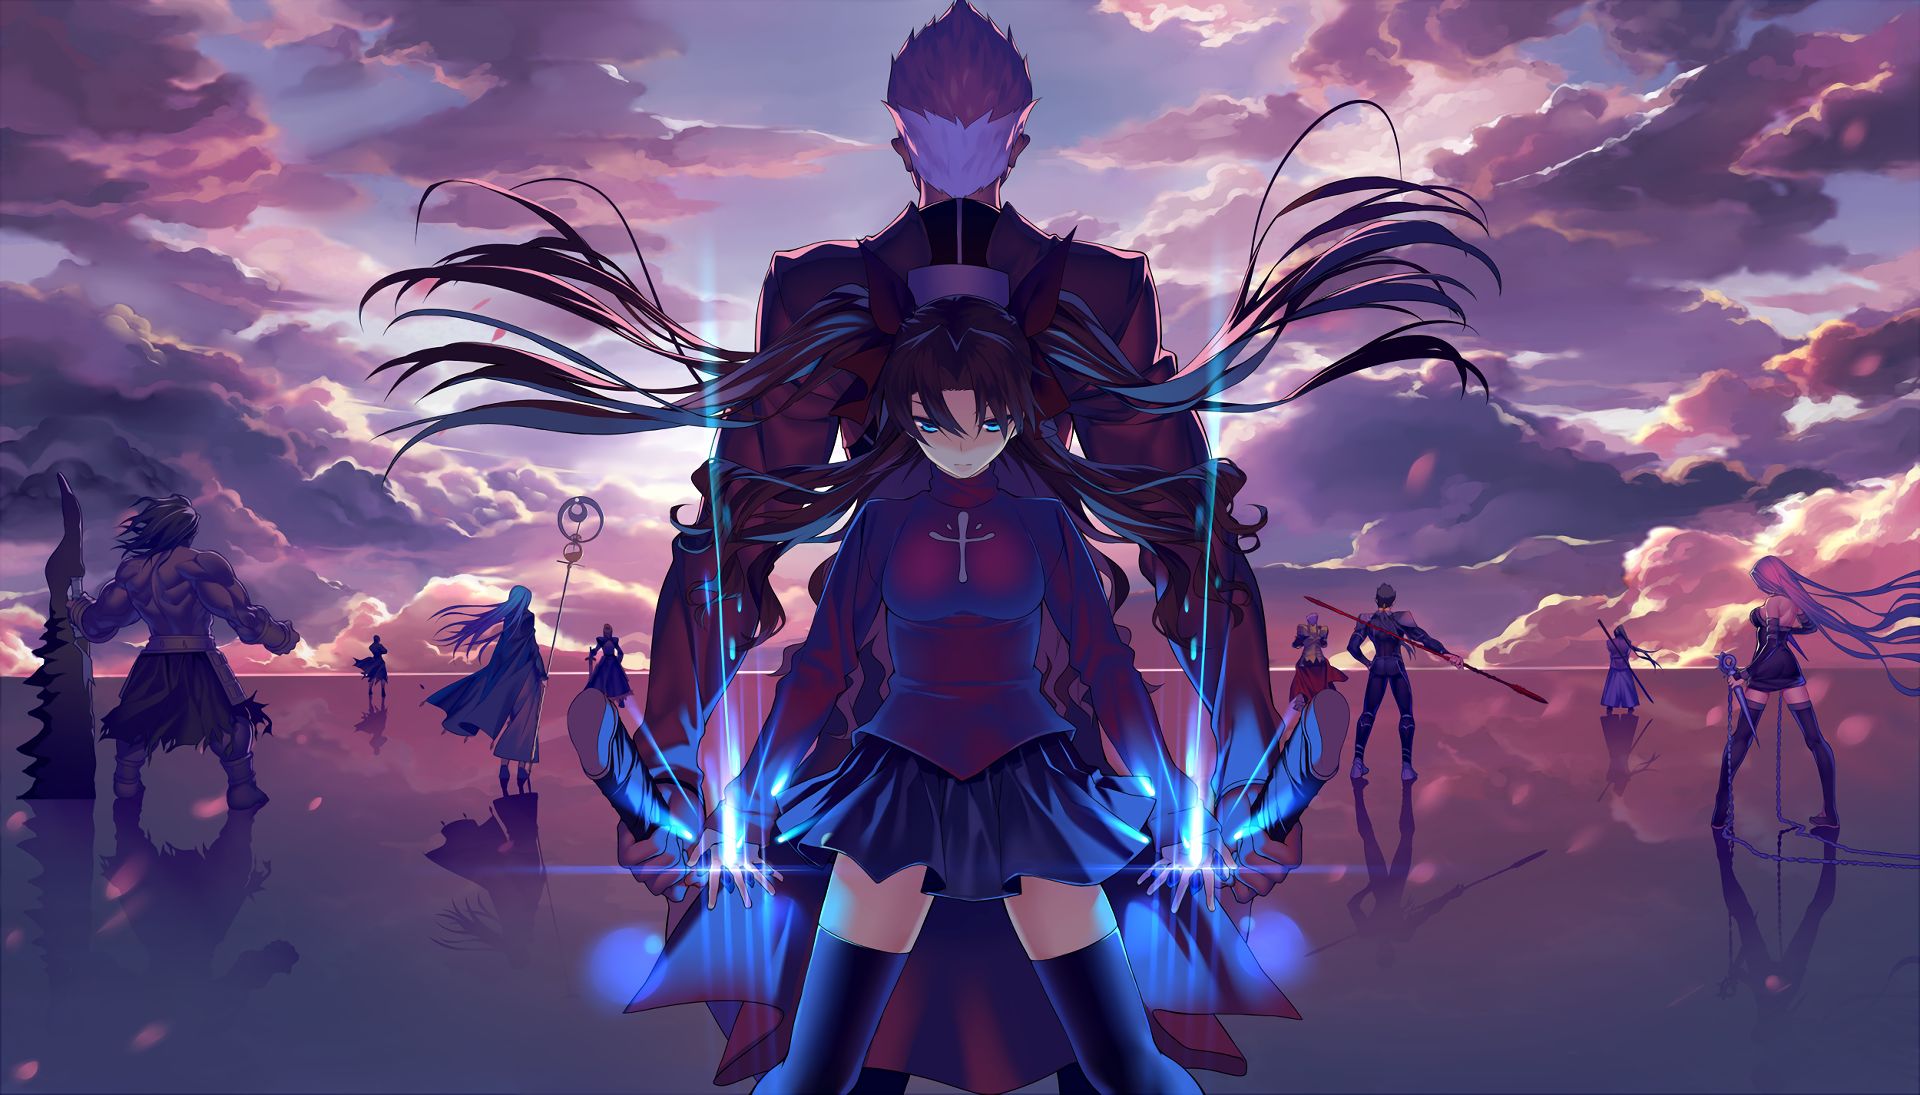 reflection, fate series, anime, fate/stay night: unlimited blade works, archer (fate/stay night), blue eyes, cloud, rin tohsaka, skirt, staff, sword, thigh highs, weapon Aesthetic wallpaper